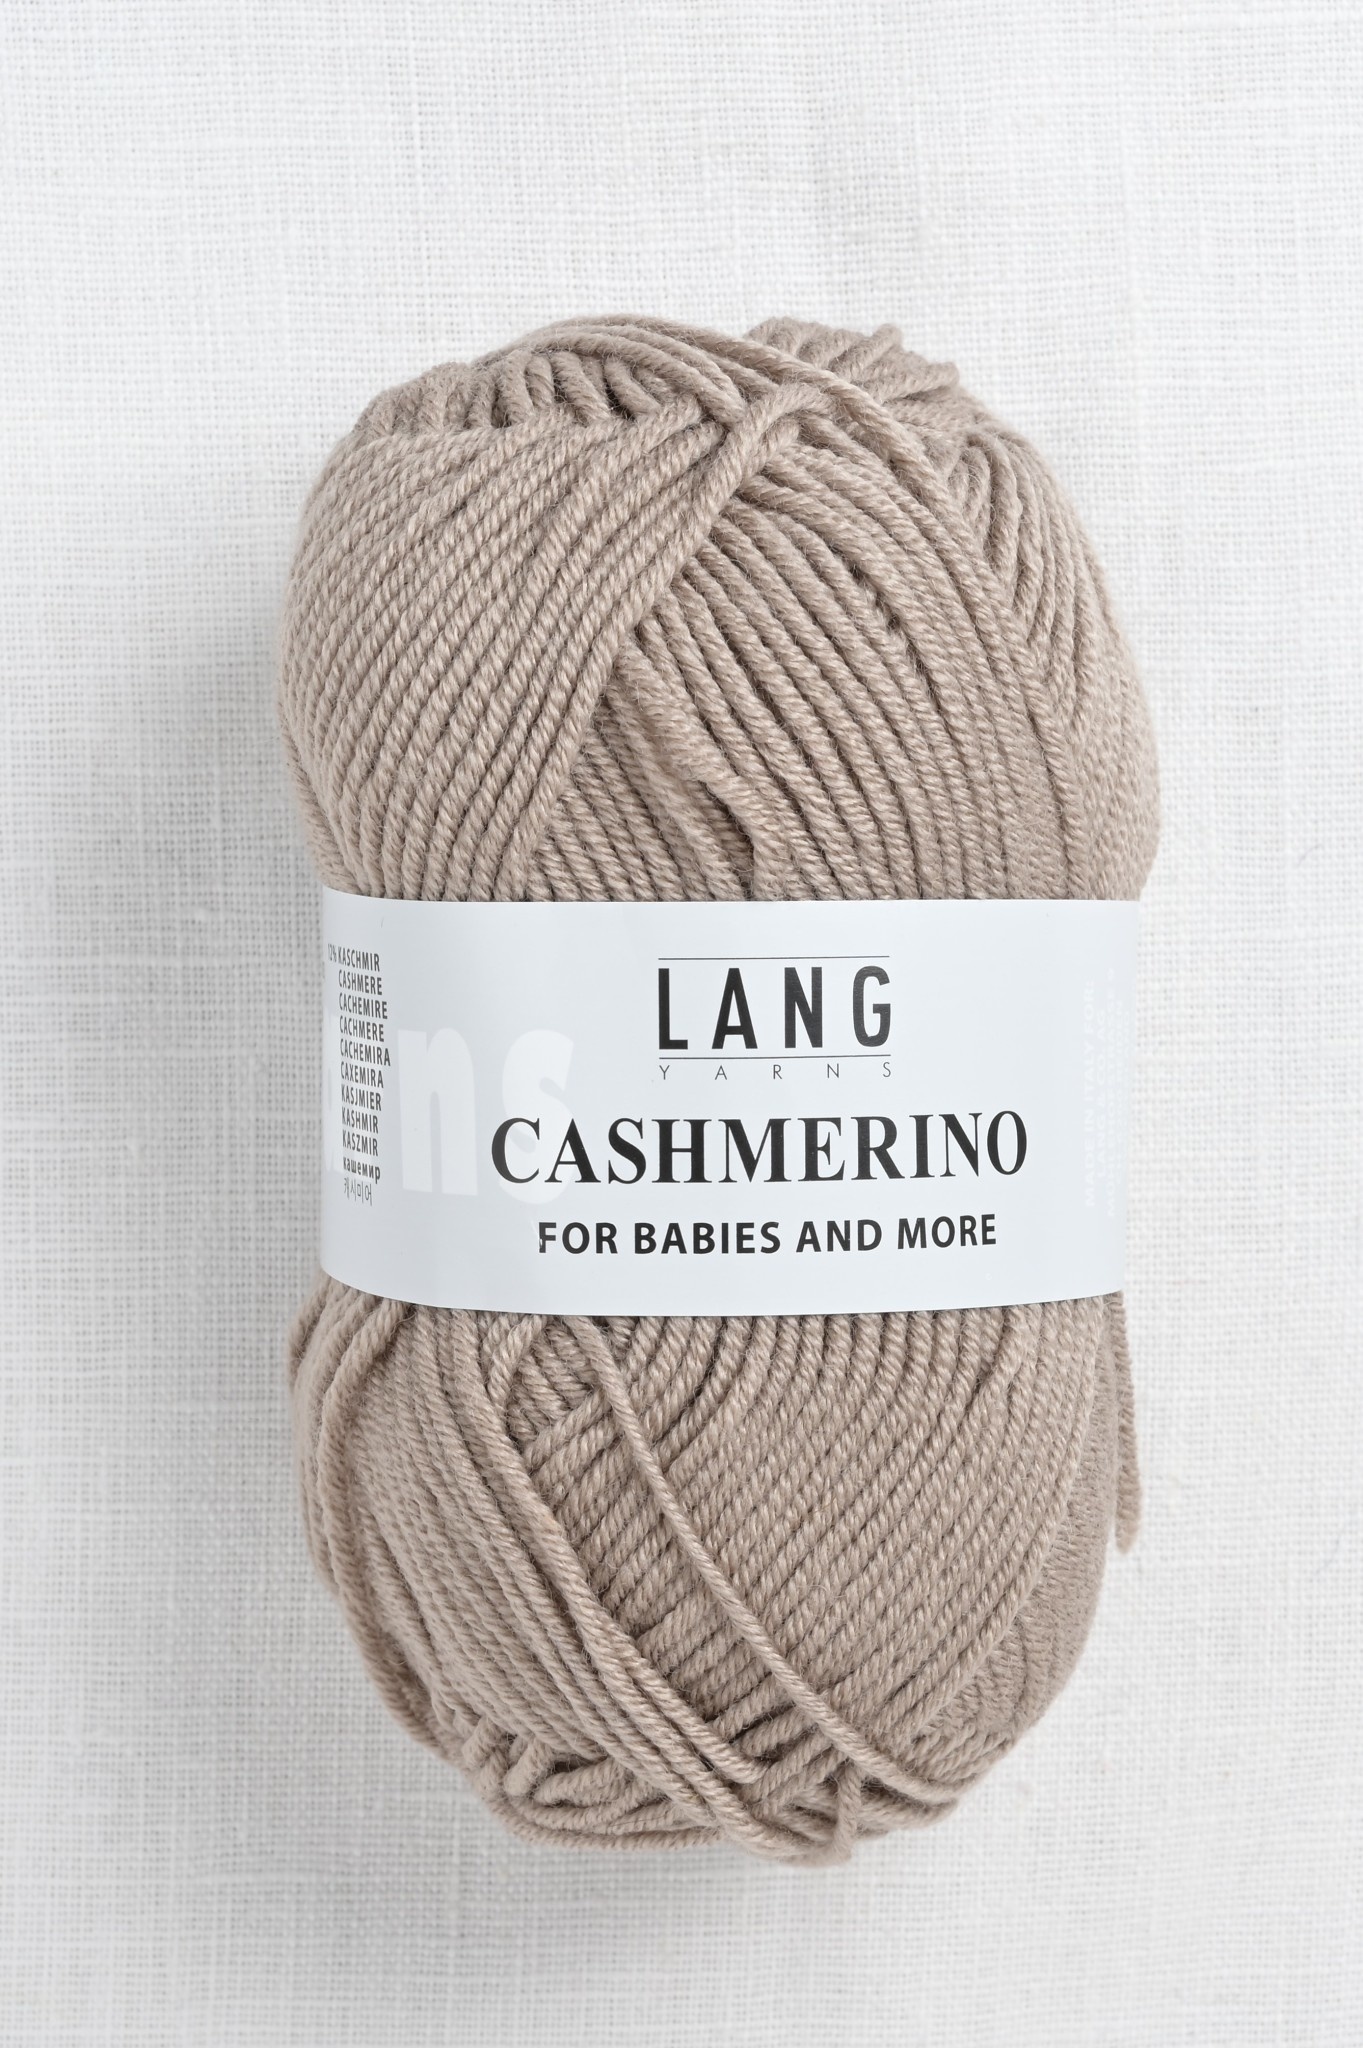 råolie Morgen renhed Lang Cashmerino 26 Beachy - Wool and Company Fine Yarn